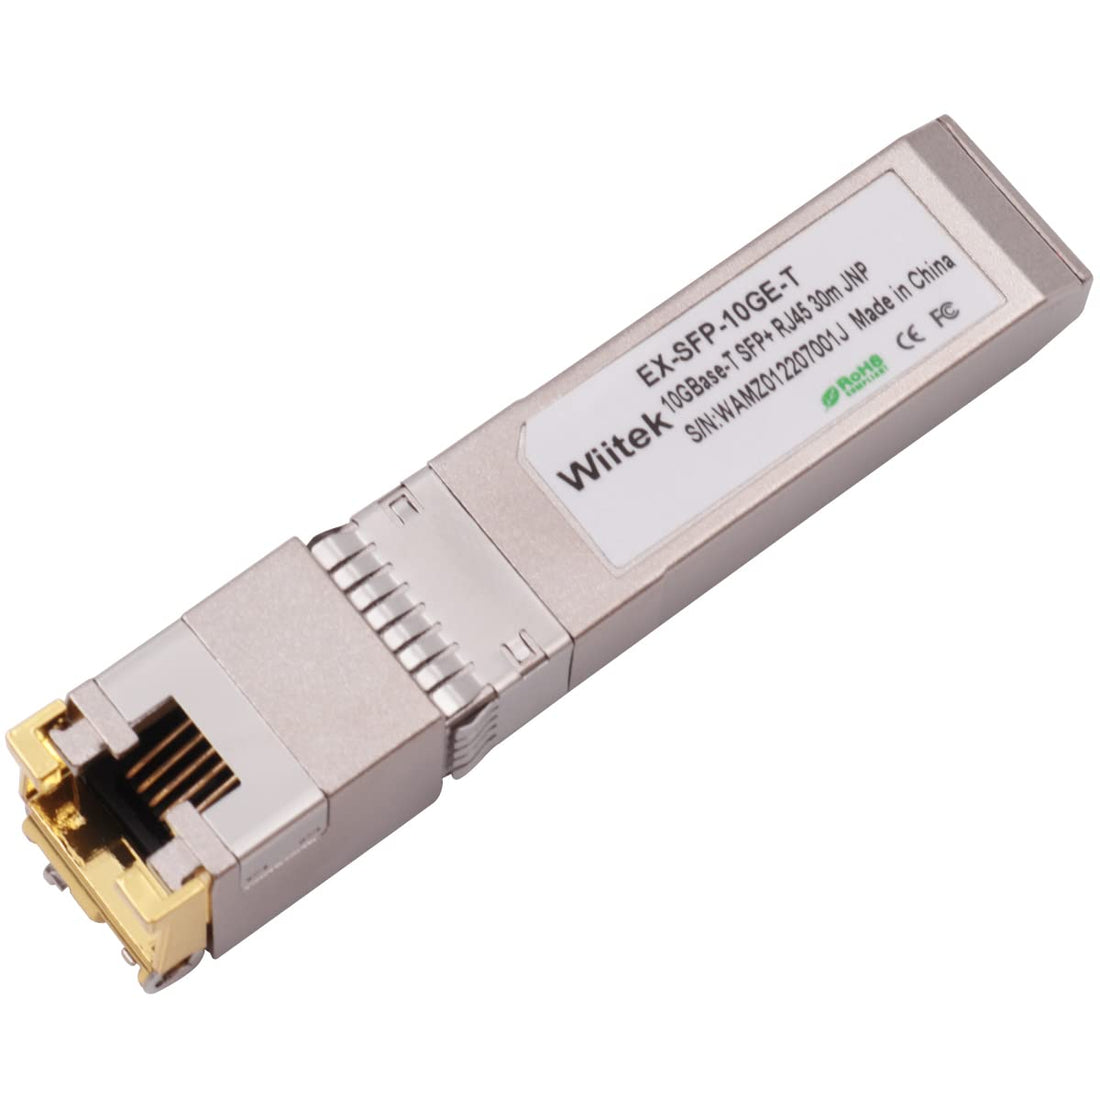 Wiitek SFP+ to RJ45 Copper Modules, 10GBase-T Transceiver Compatible for Juniper EX-SFP-10GE-T(Cat 6a/7 or Better, 30-Meter)